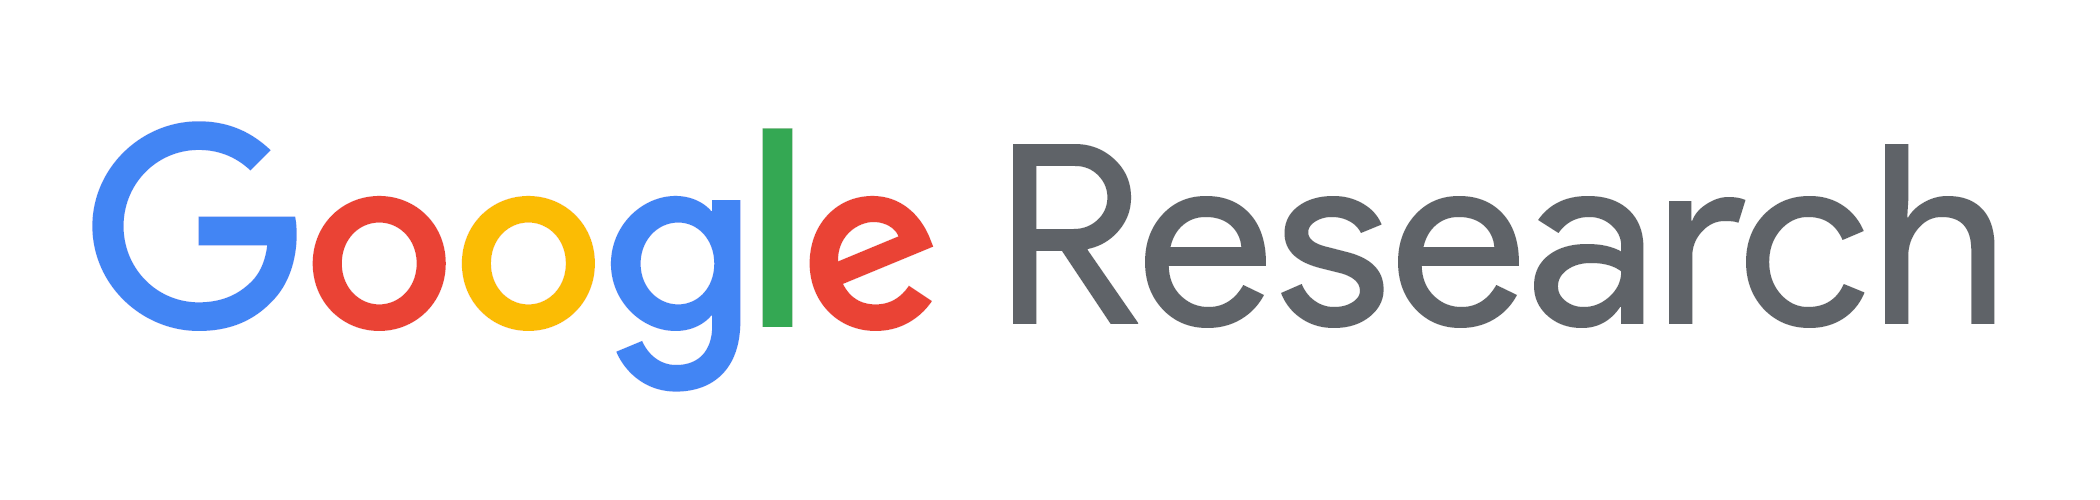 Google Ressearch